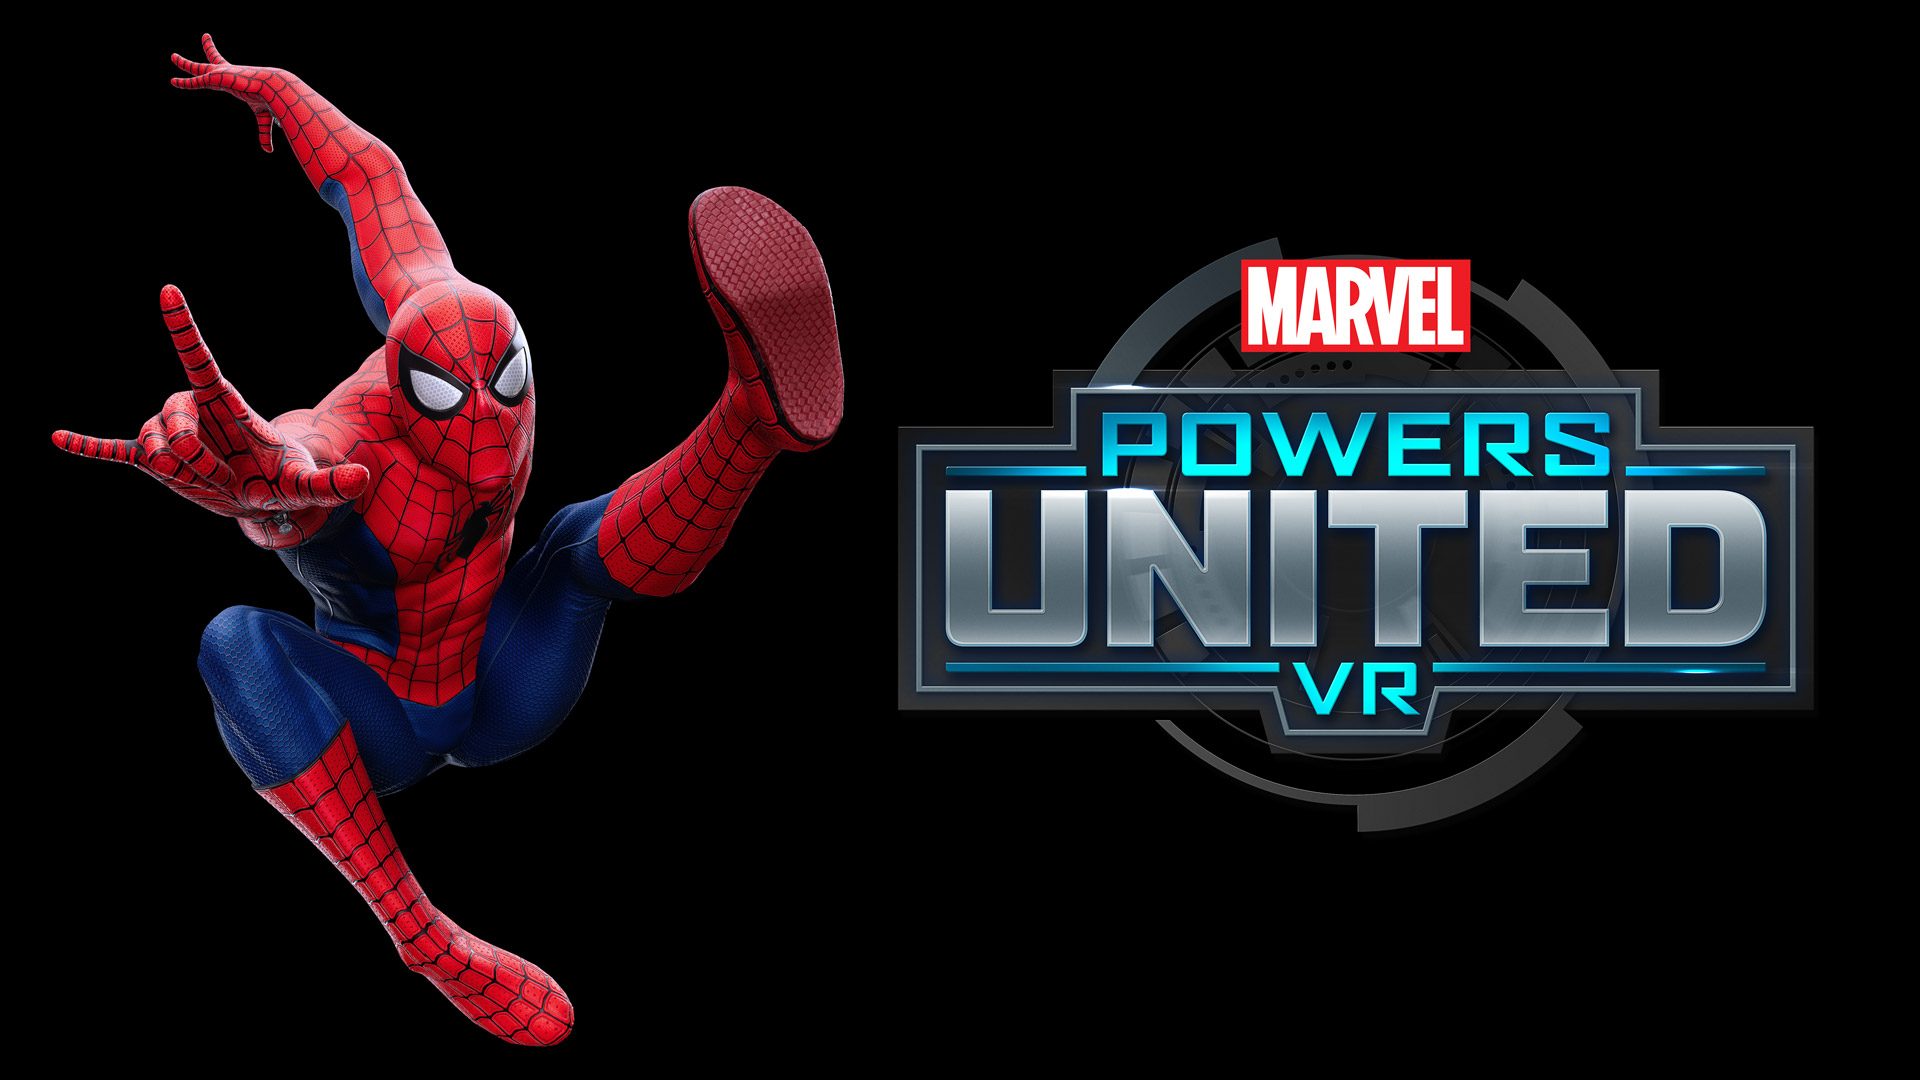 Marvel Powers United VR, the next big exclusive title from Oculus Studios, ...